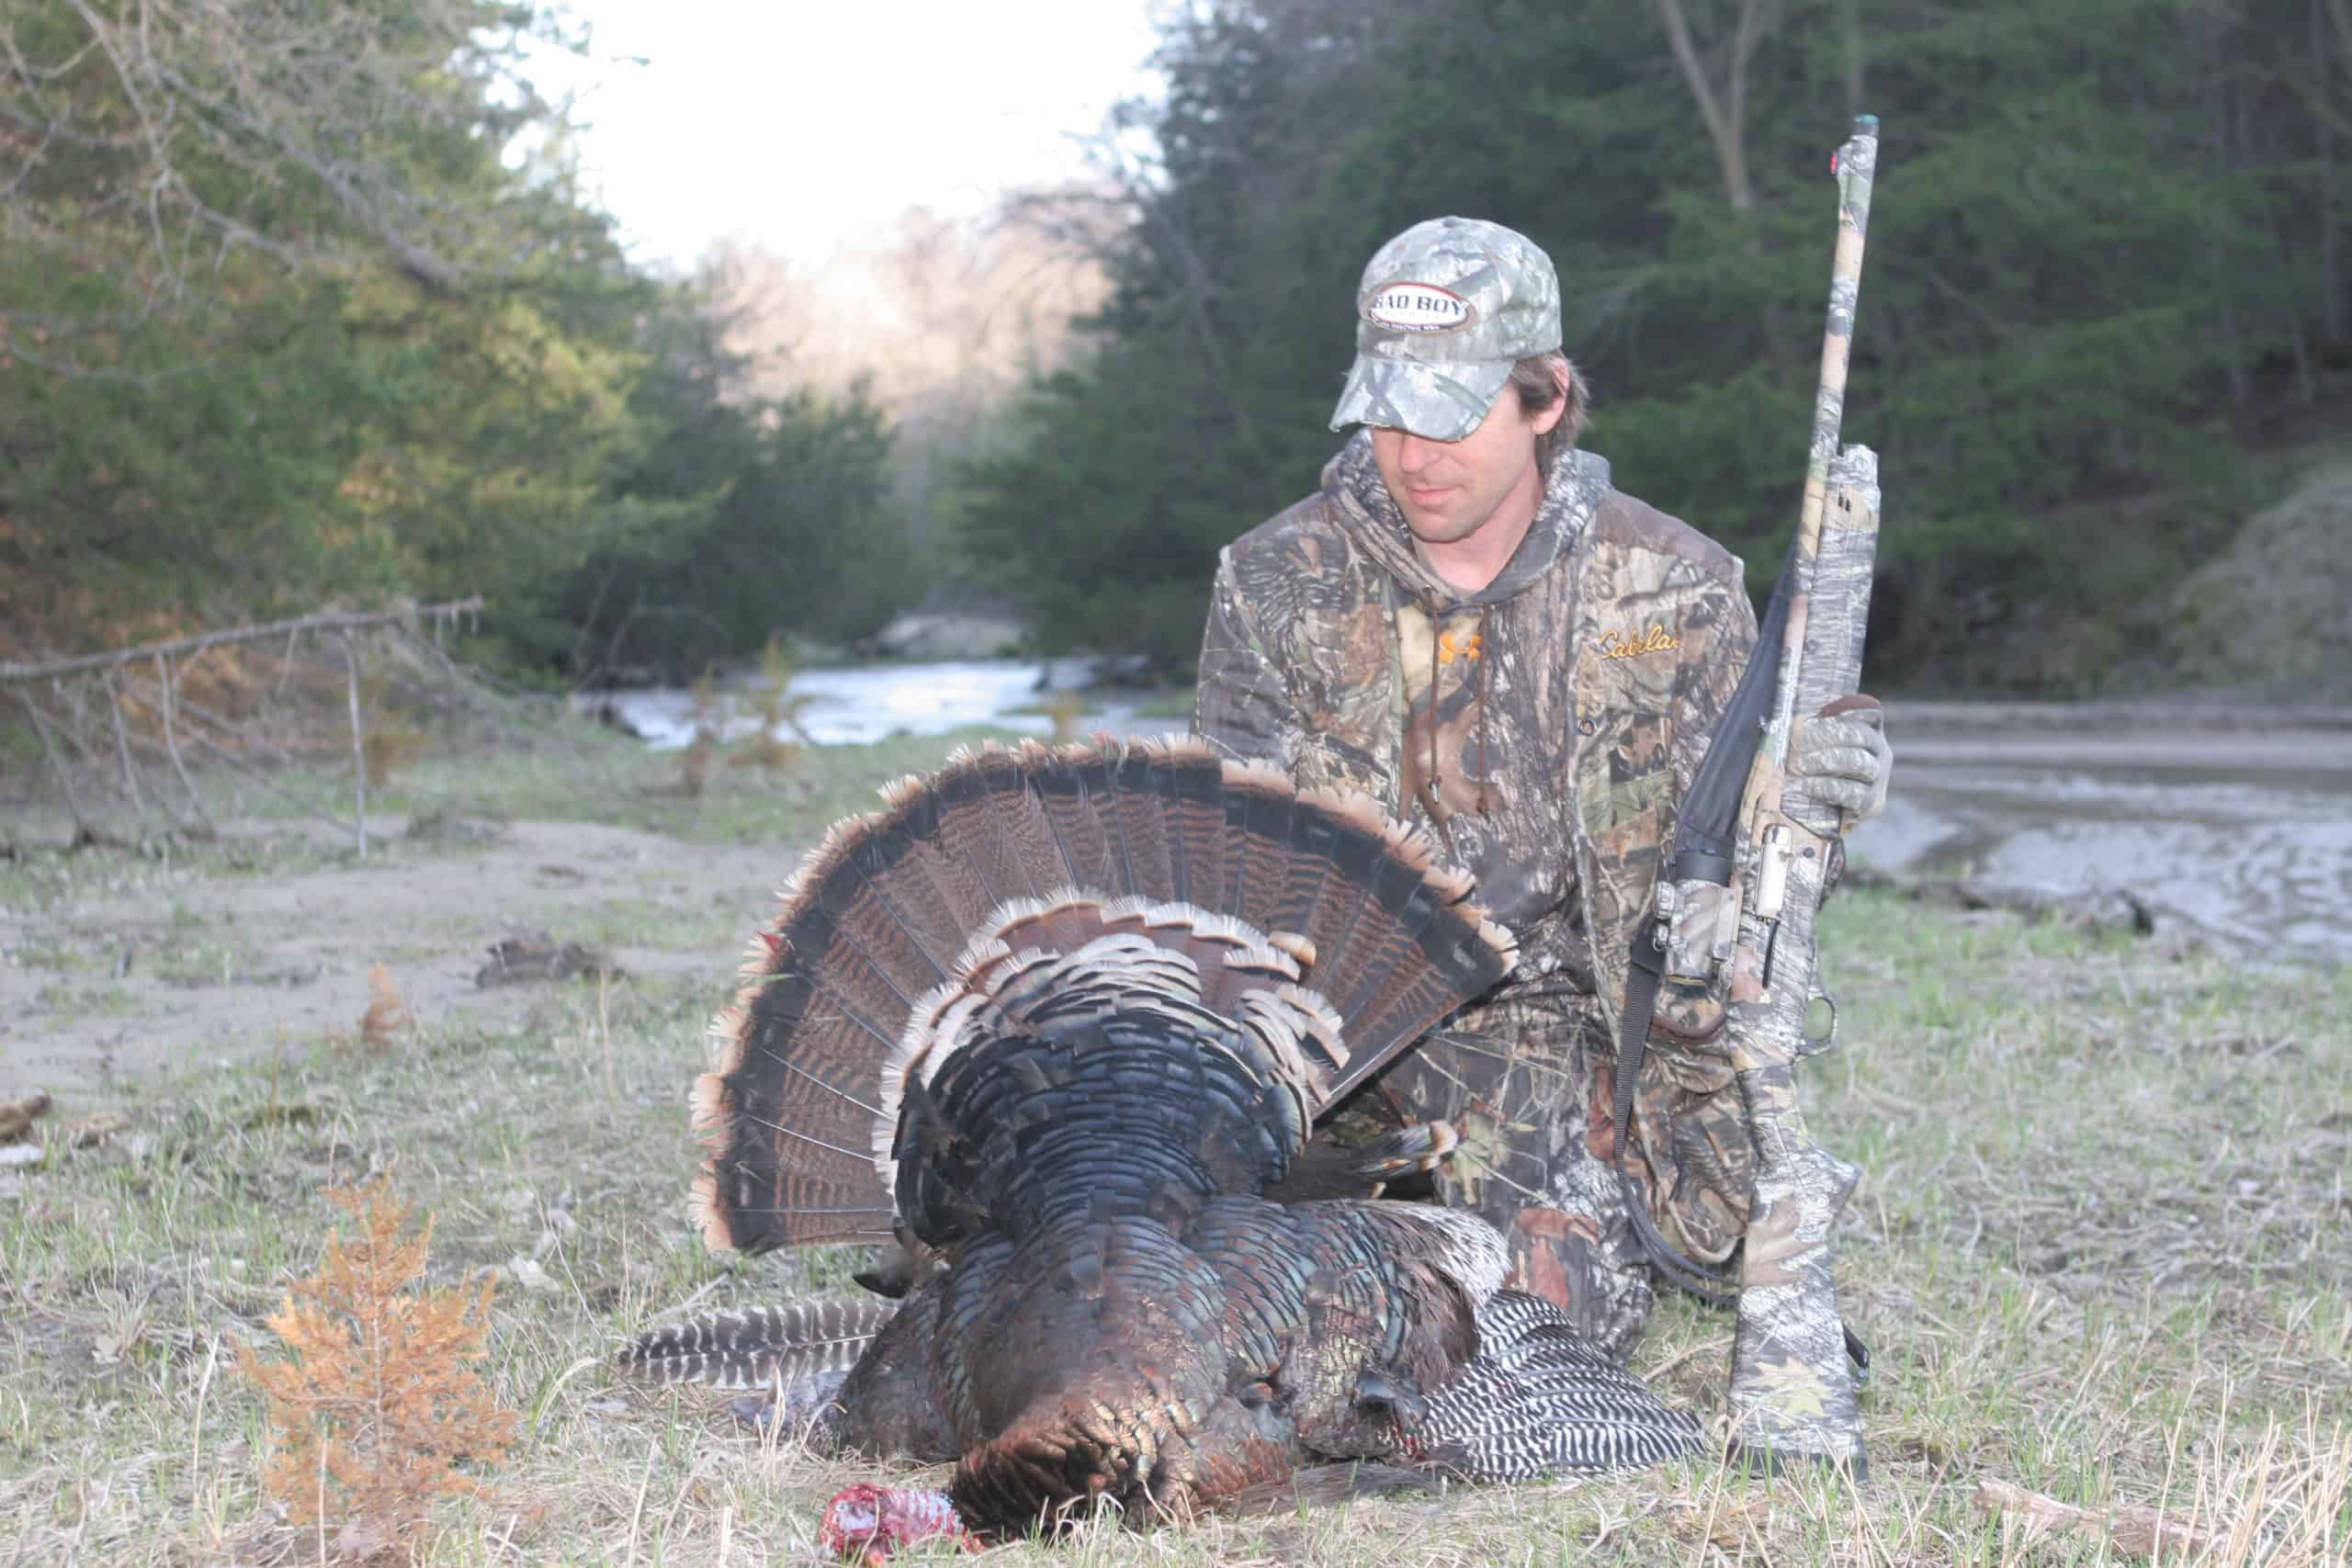 The author, David Hart, is most proud of his first Merriam’s gobbler, taken in northern Nebraska. The landscape is stunning, the birds are abundant, and a Merriam’s gobbler can be easy to call into gun range compared to other subspecies.